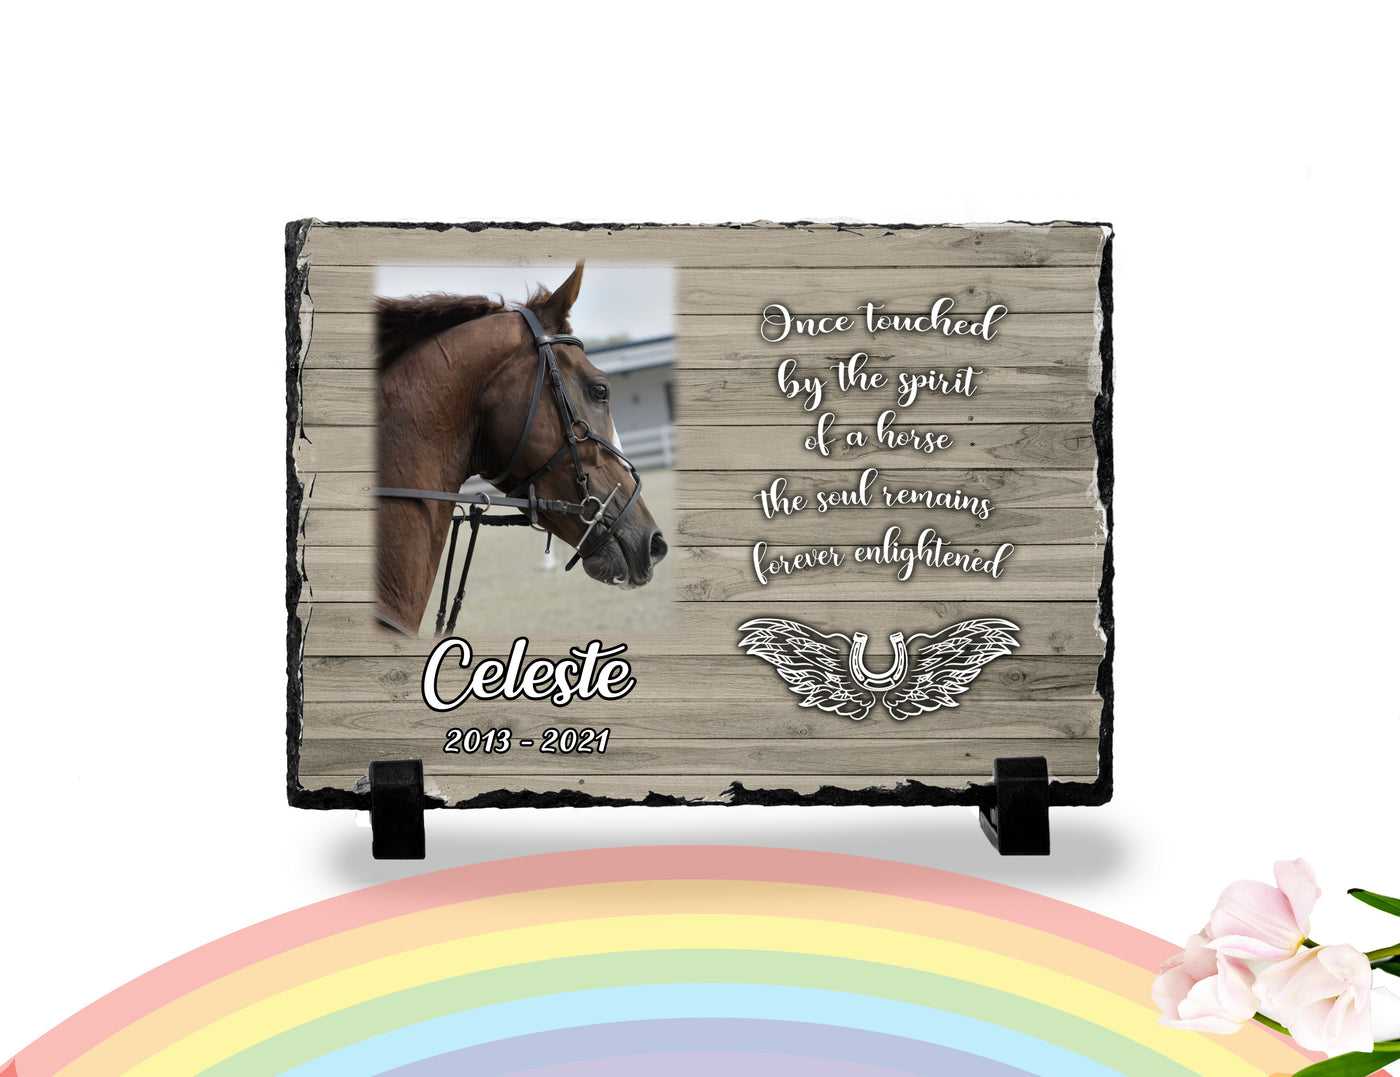 Personalized Horse Memorial Plaque   Once Touched by the Spirit of a horse The soul remains forever enlightened    Personalized Keepsake Memorial Slates